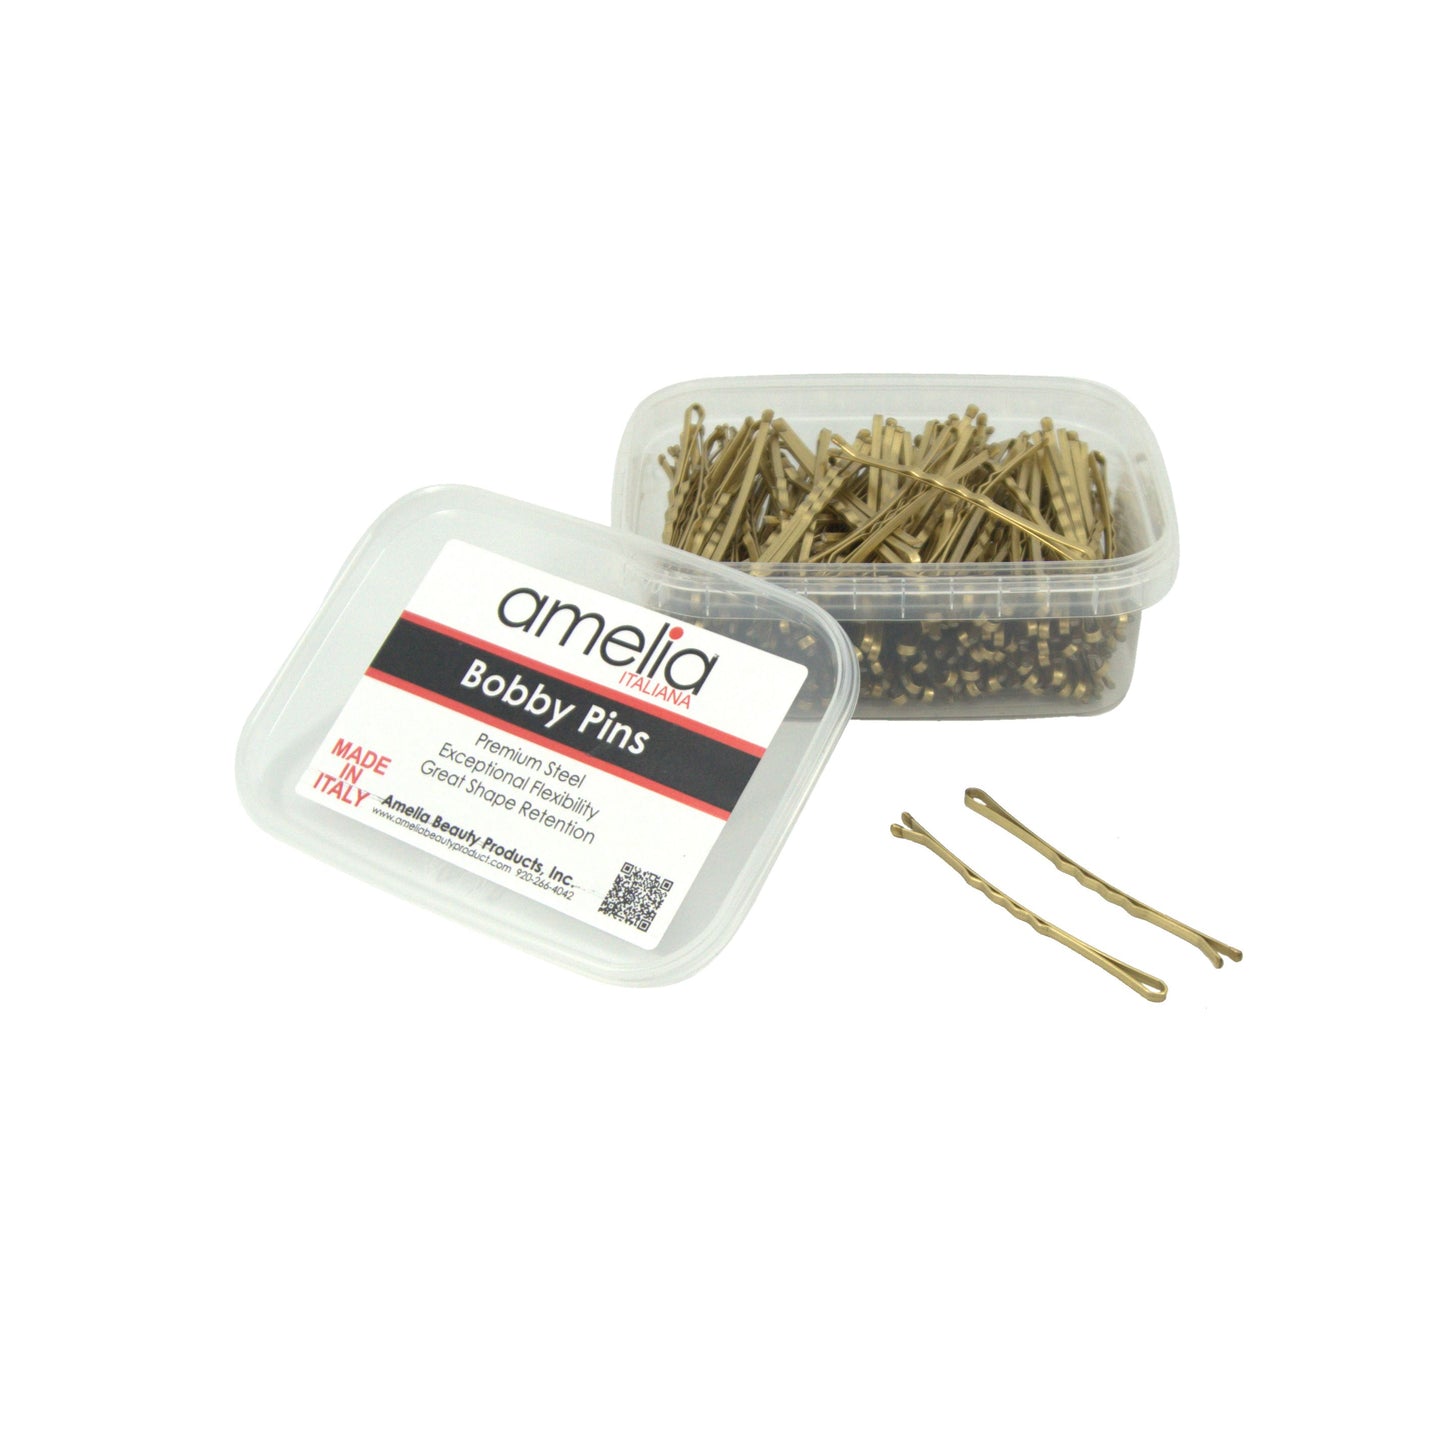 180, Brassed Color, 2.8in (7.0cm), Italian Made Jumbo Bobby Pins, Recloseable Stay Clean and Organized Container